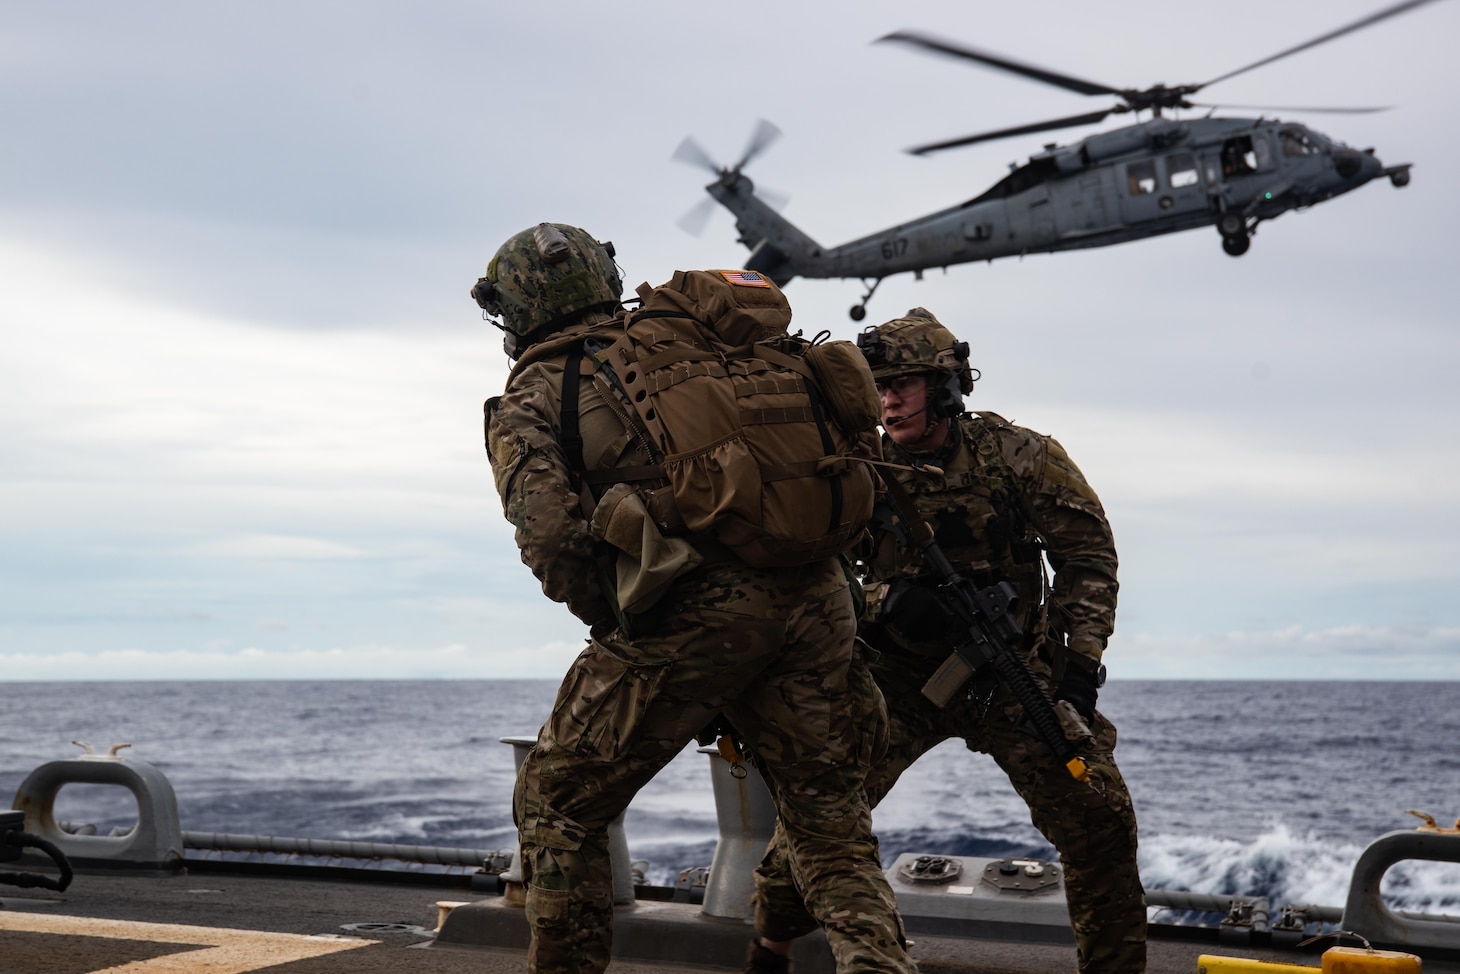 190625-N-RF825-1085 SOUTH CHINA SEA — Sailors from Explosive Ordnance Disposal Mobile Unit 5 attached to Commander Task Force (CTF) 70 conduct Helicopter Vertical Board Search and Seizure (HVBSS) training operations aboard USS McCampbell (DDG 85). CTF 70 is forward-deployed to the U.S. Seventh Fleet area of operations in support of security and stability in the Indo-Pacific Region.